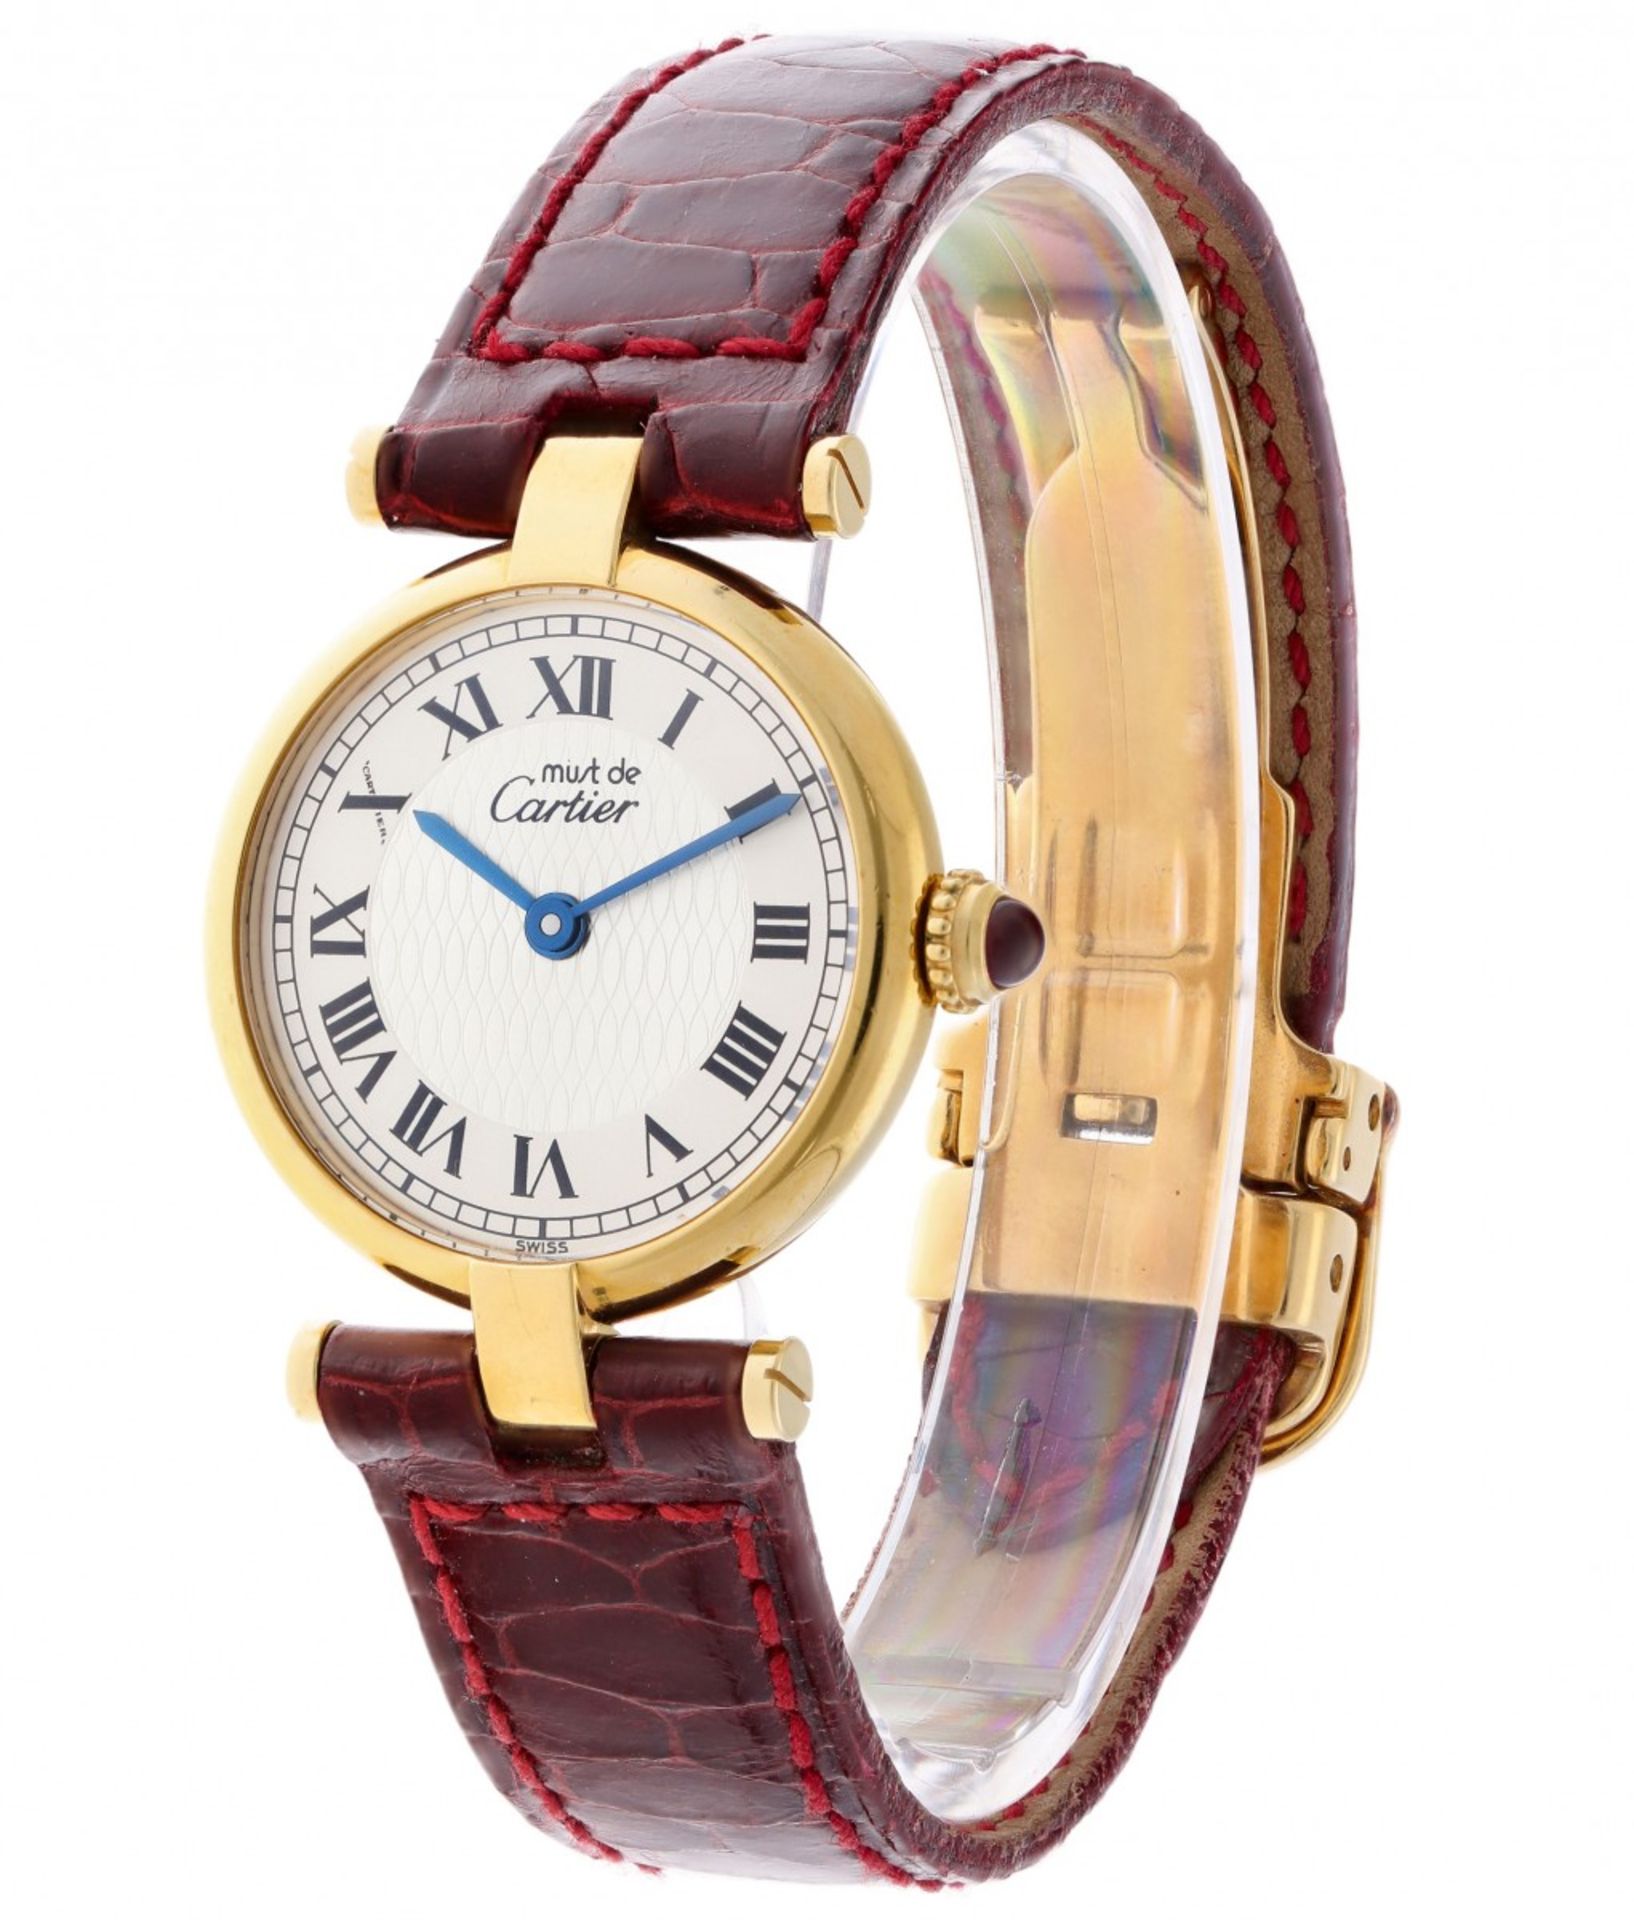 Cartier Vermeil, limited ed. - Ladies watch - ca. 1985 - Image 2 of 5